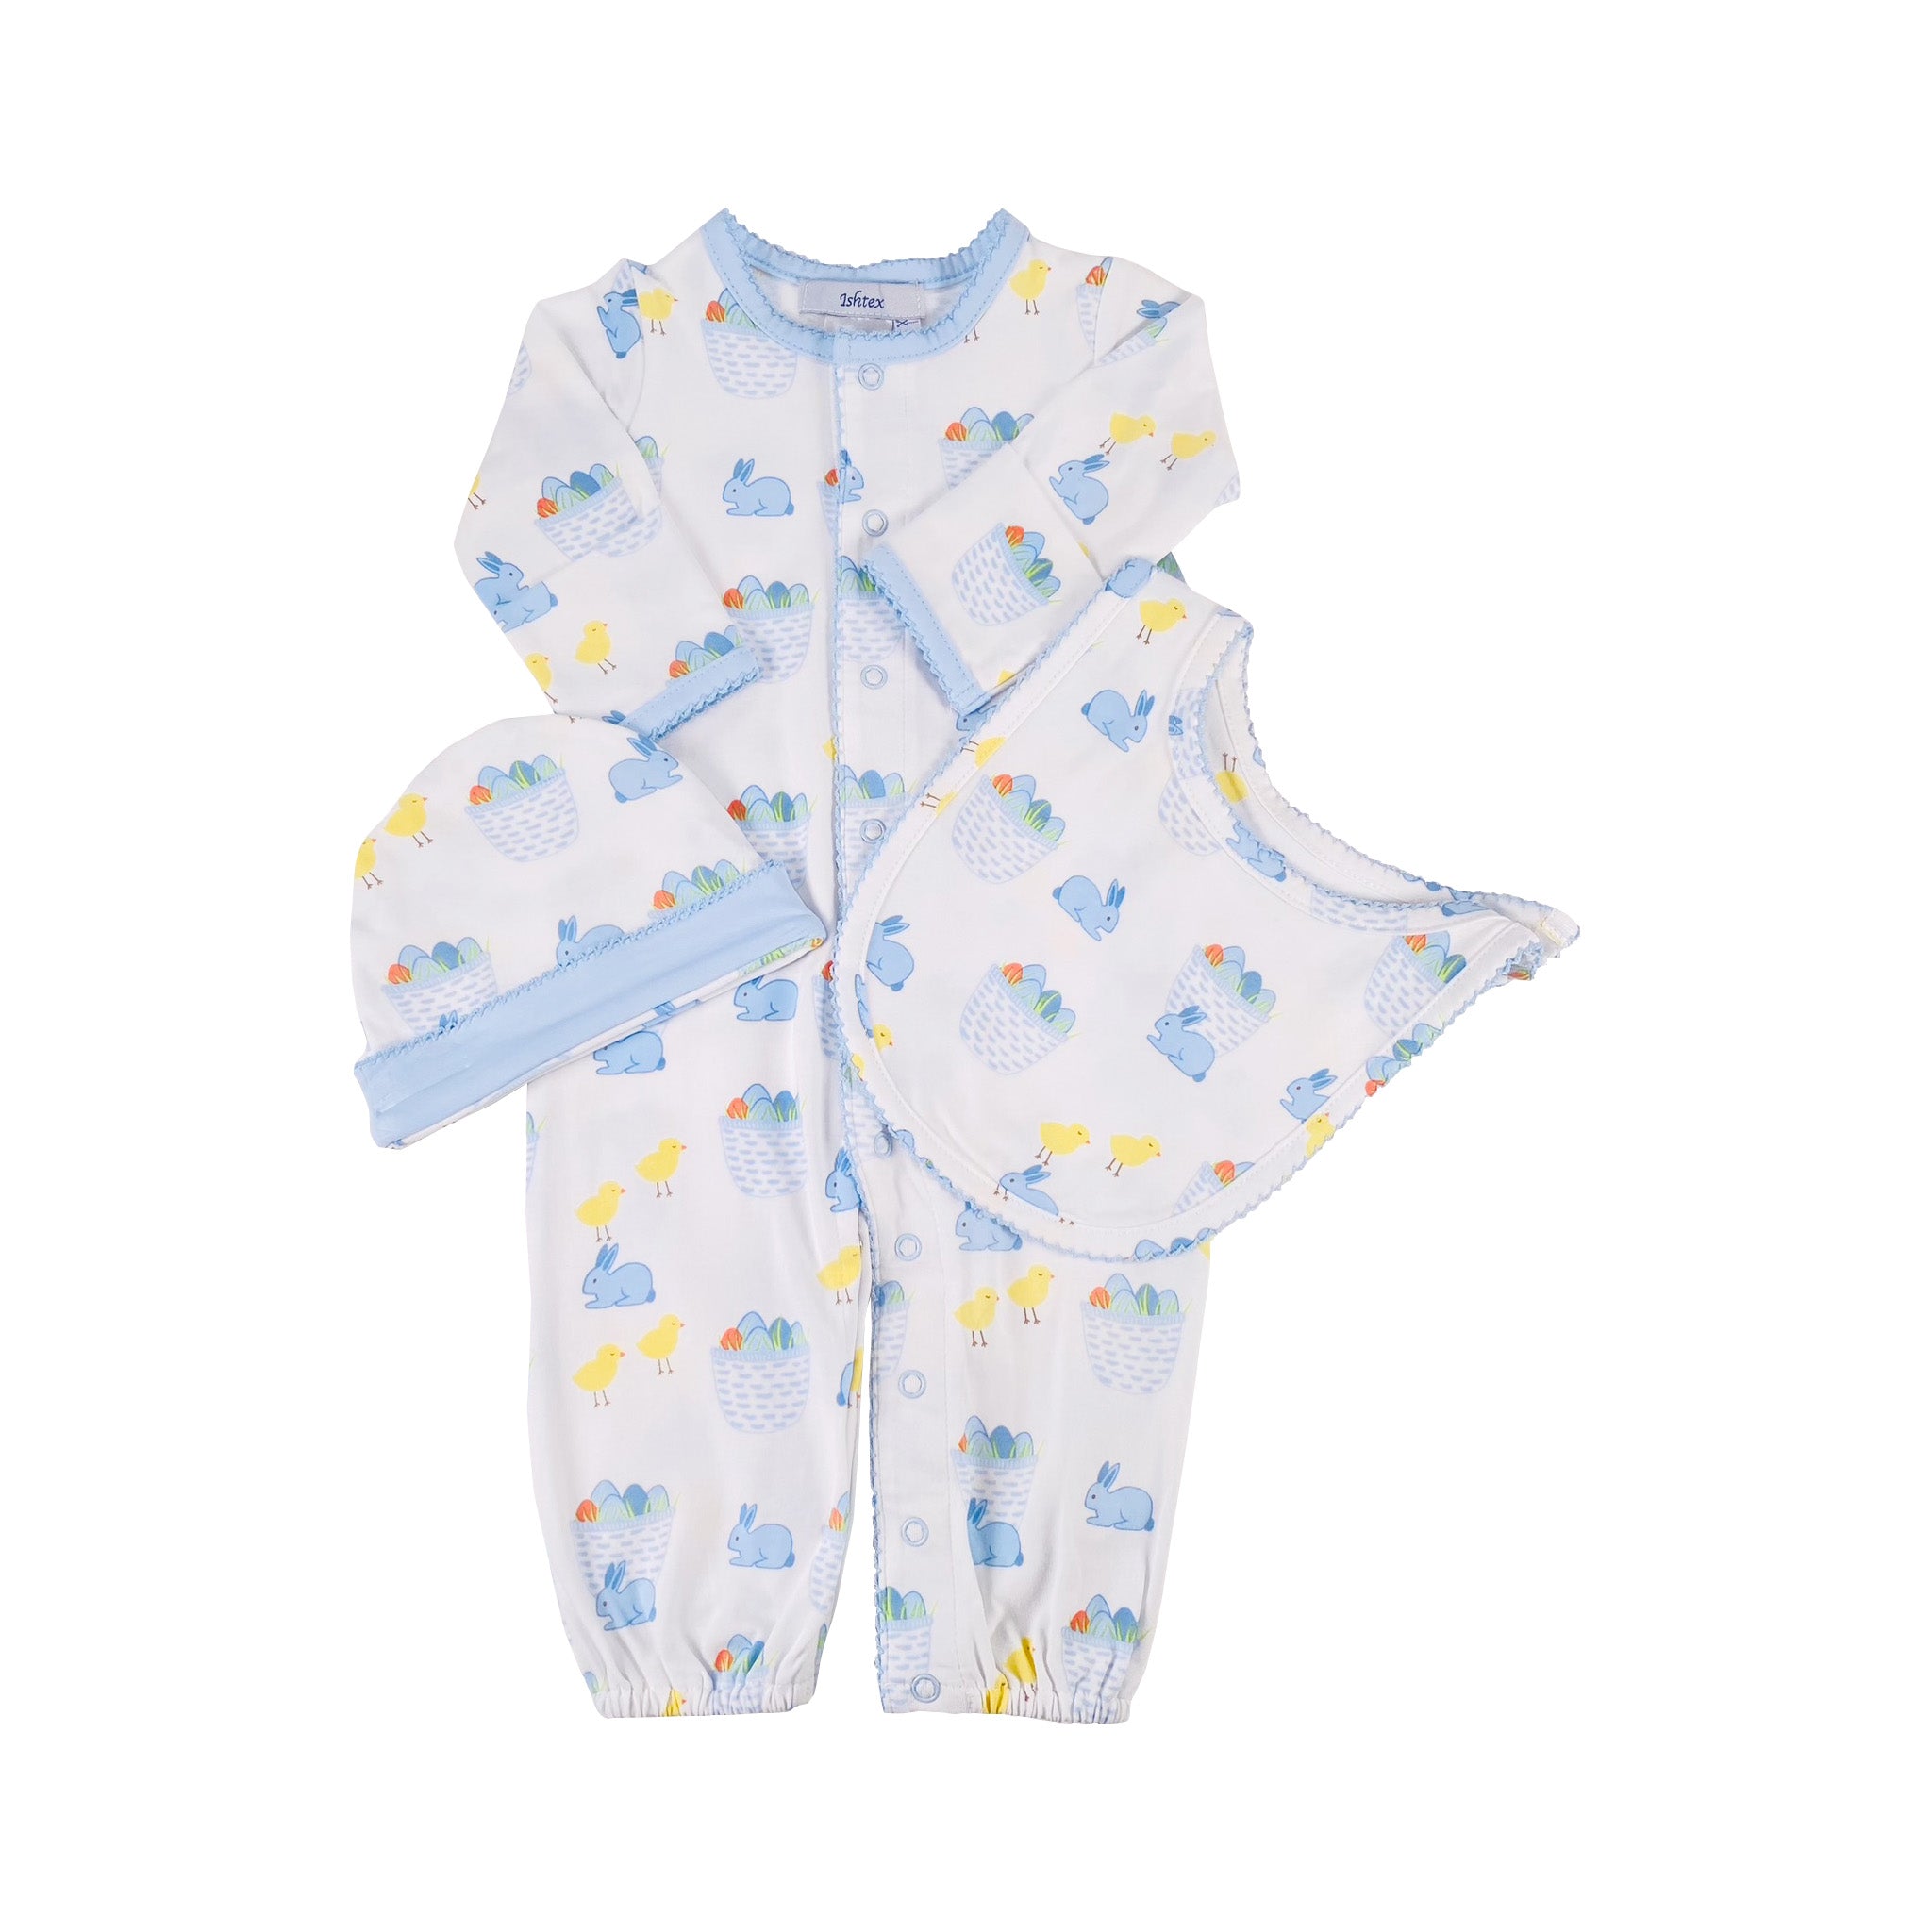 4-Pack Baby Boys Bear Gowns | Baby boy pajamas, One piece clothing, Baby boy